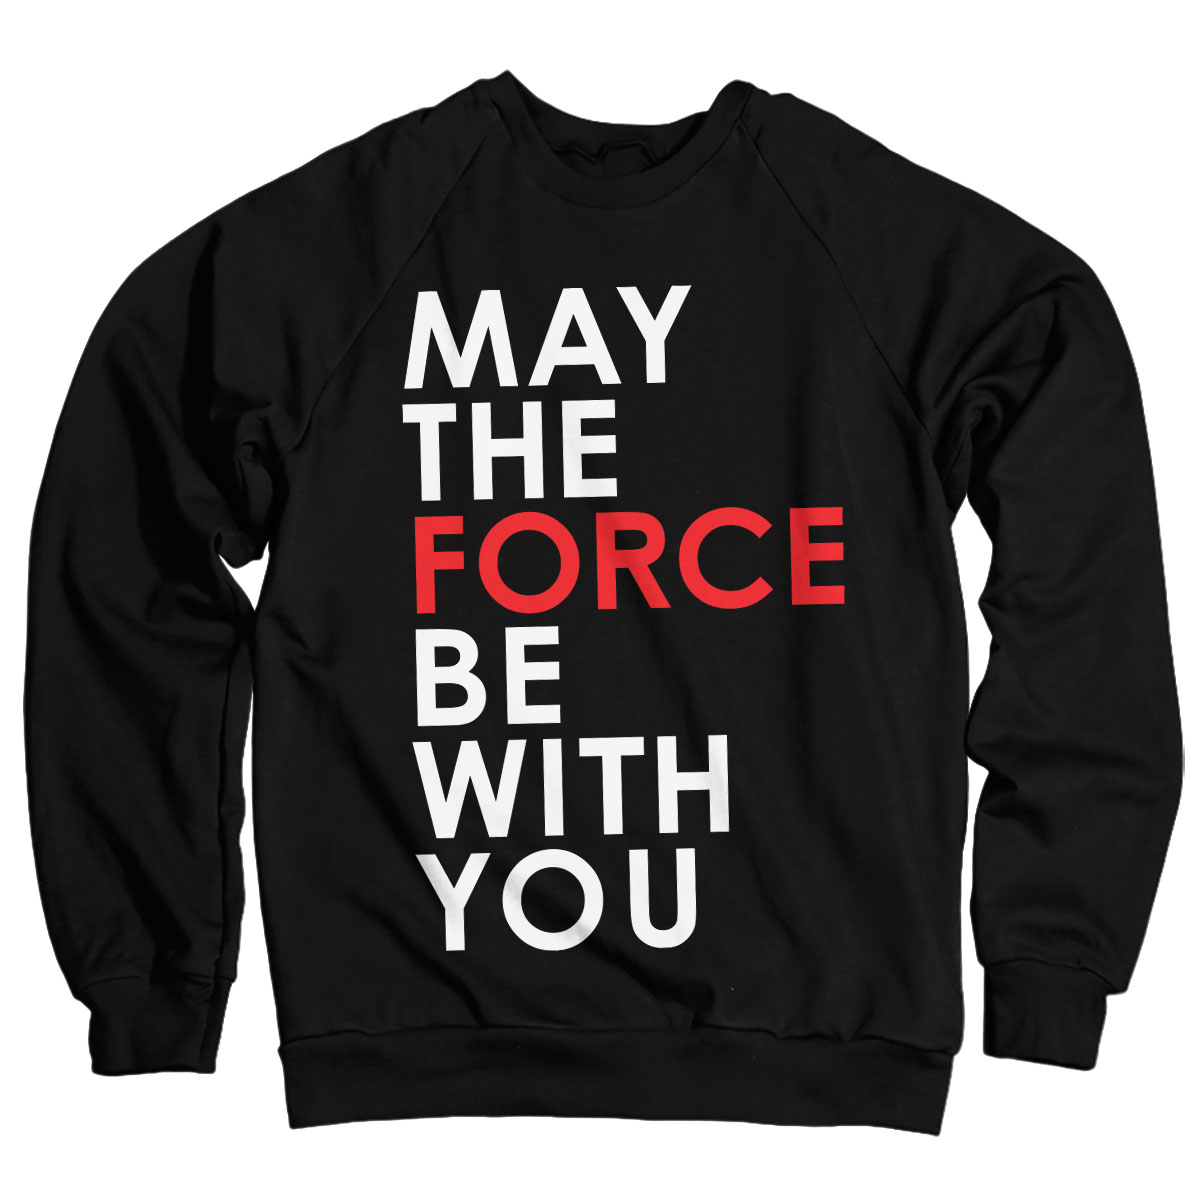 Star Wars - May The Force Be With You Sweatshirt